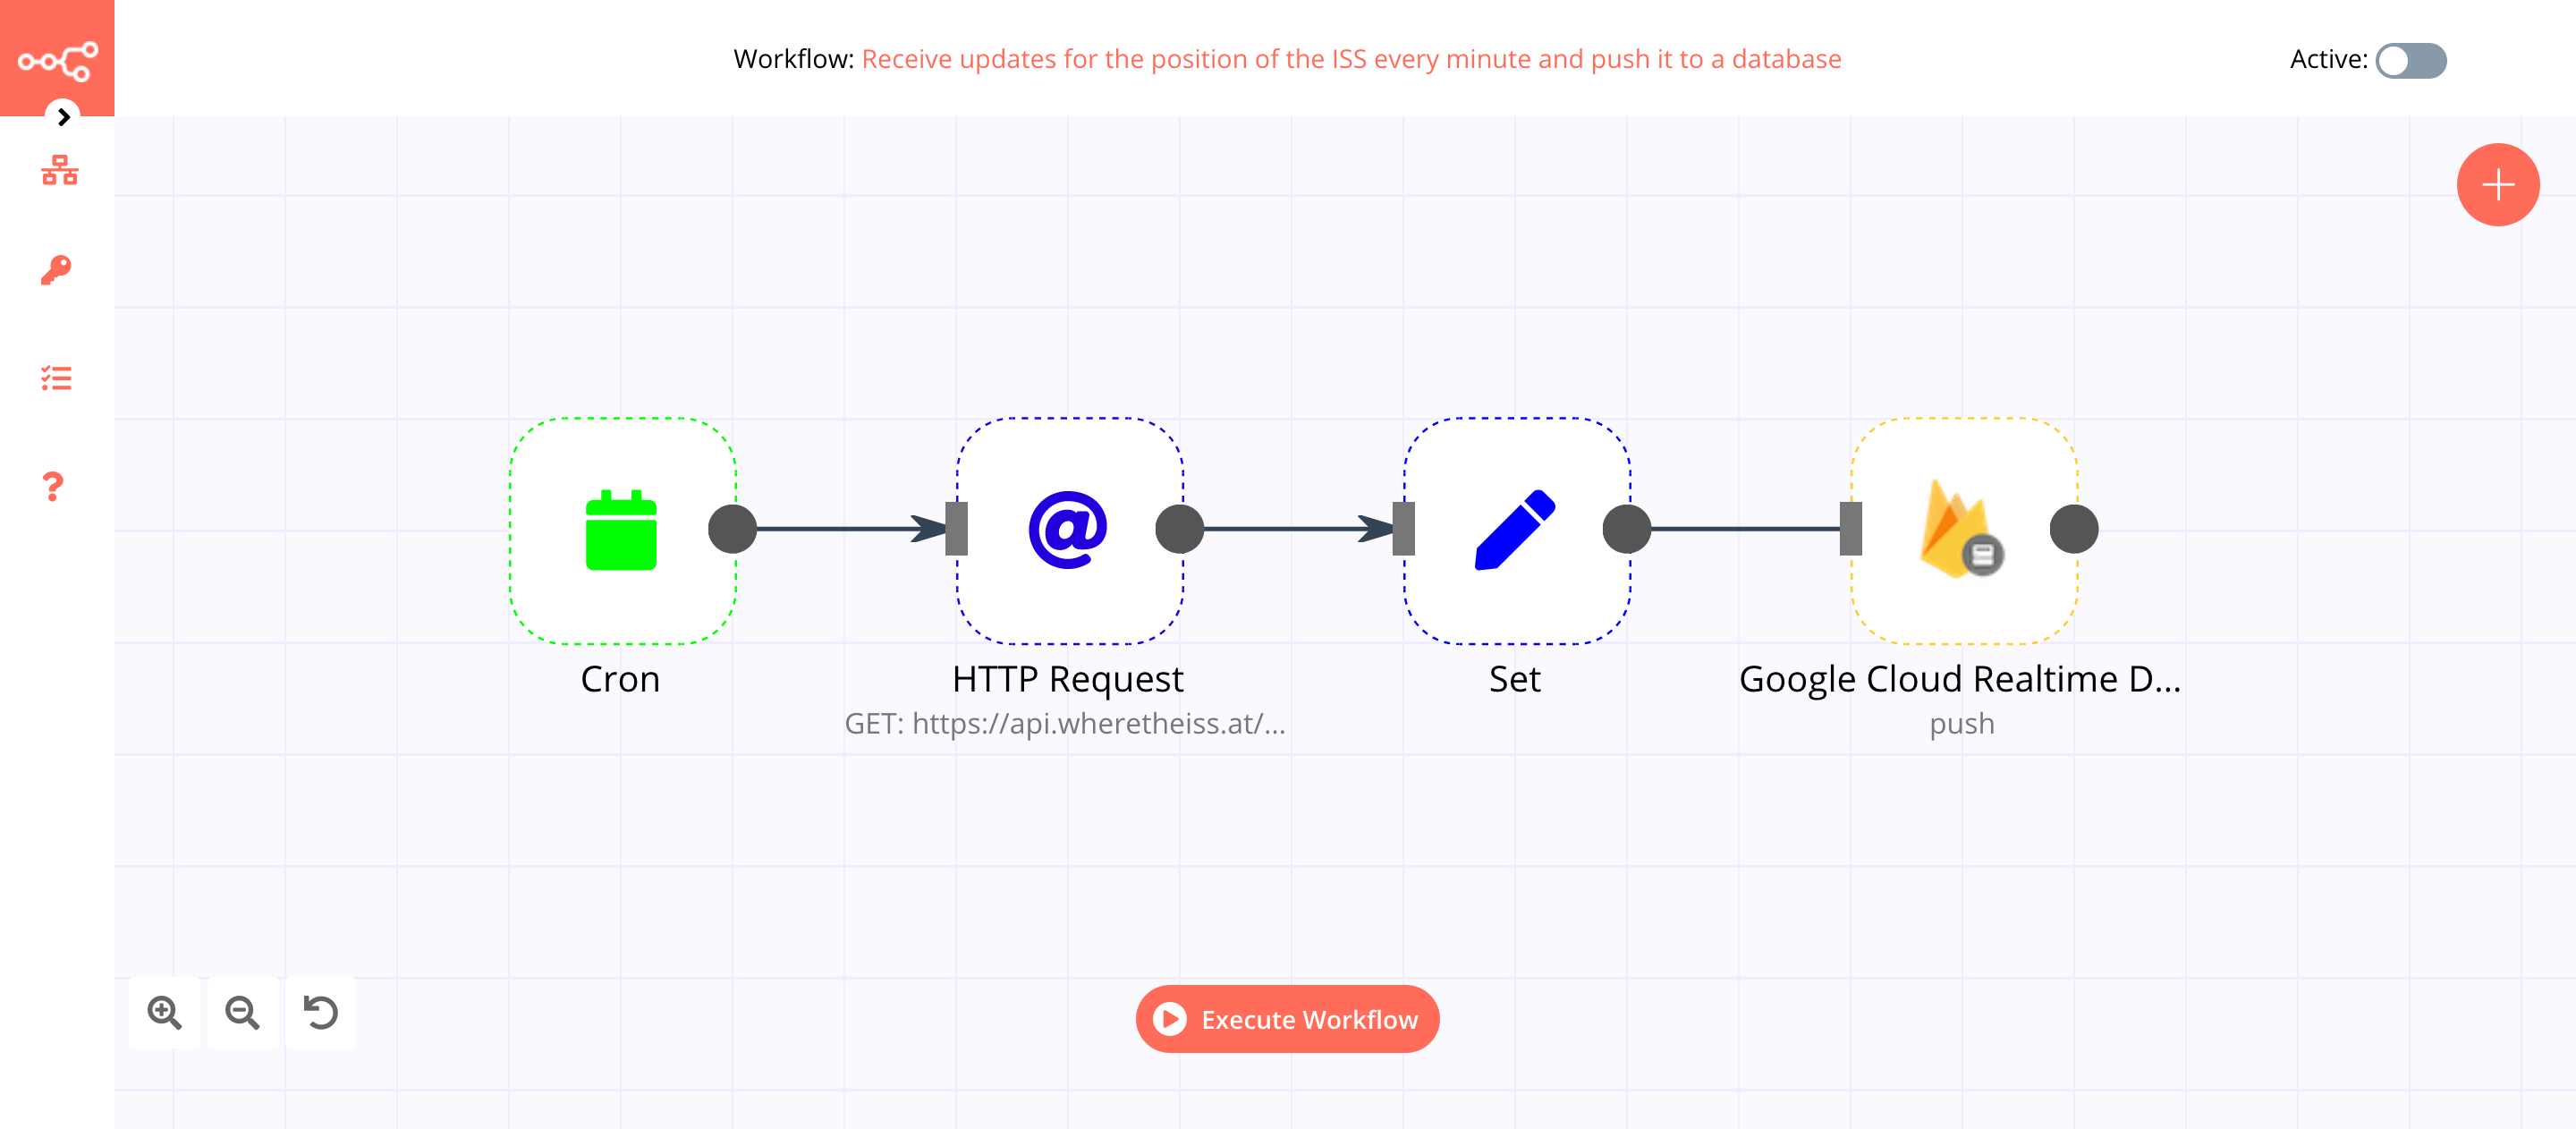 A workflow with the Google Cloud Realtime Database node